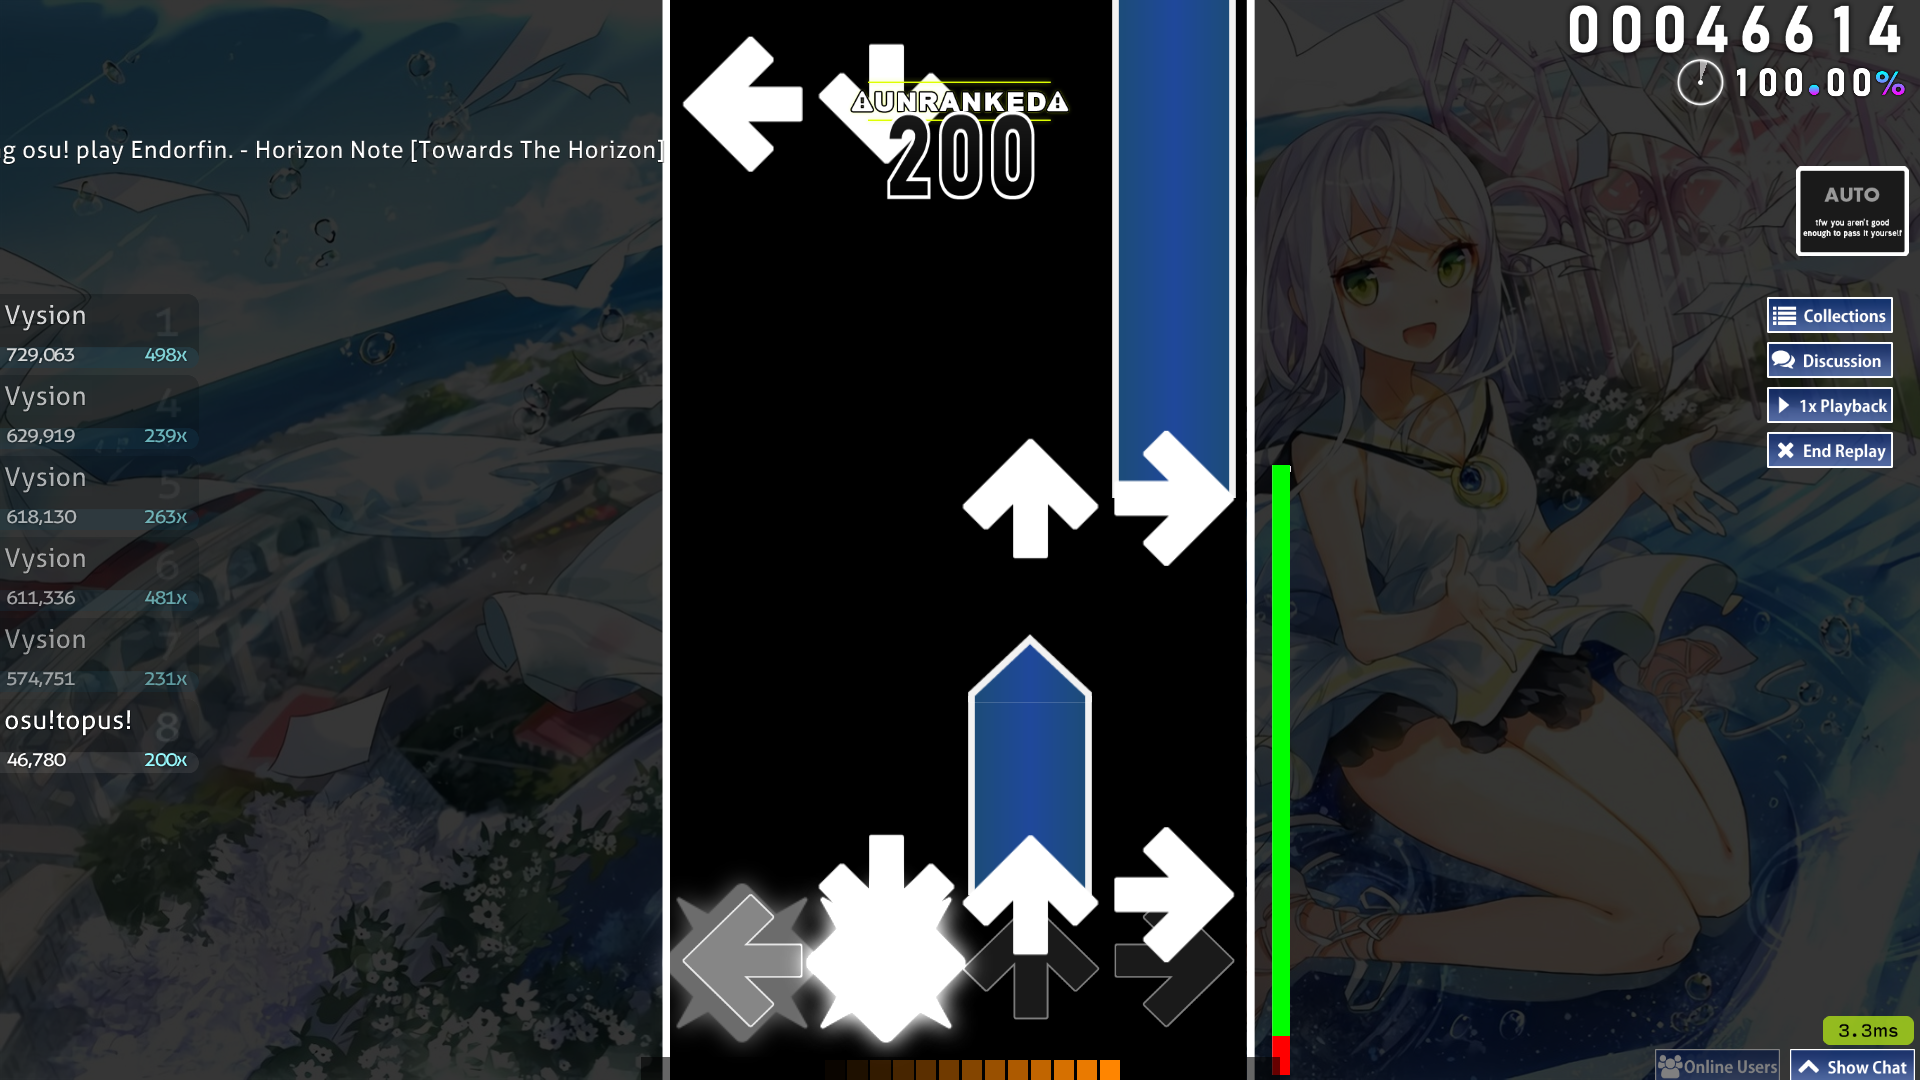 Can i make the arrows in osu!mania more closer to eachother